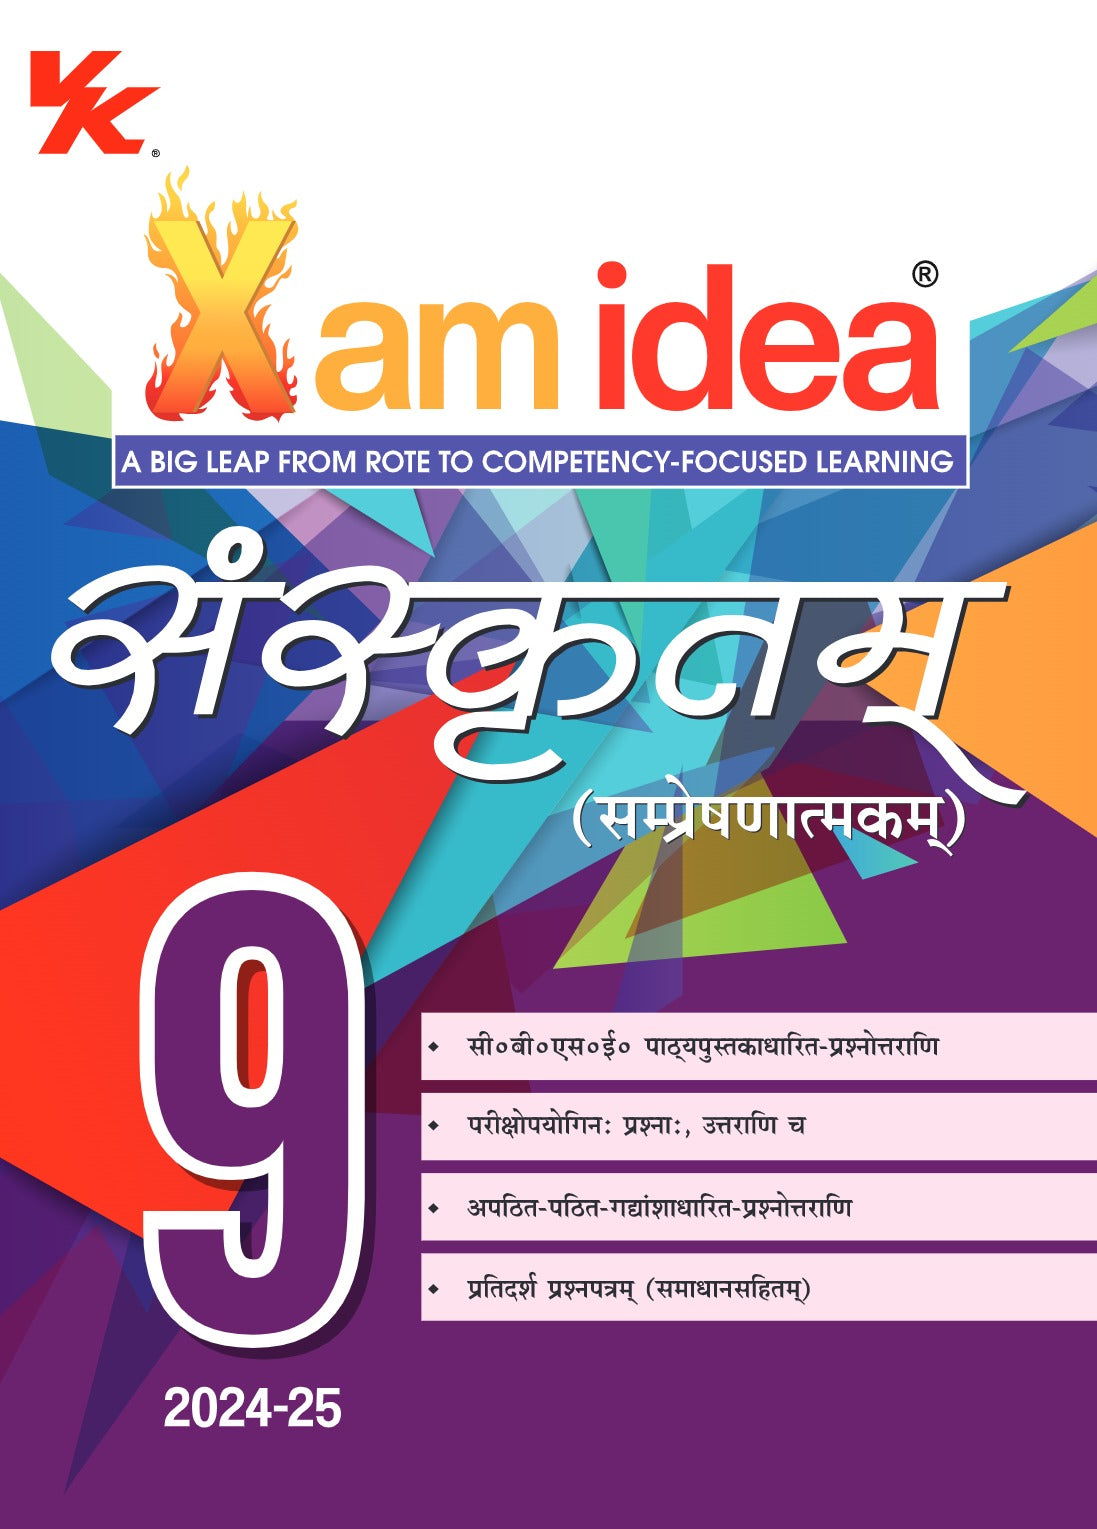 Xam idea Sanskrit (Communicative) Class 9 Book | CBSE Board | Chapterwise Question Bank | Based on Revised CBSE Syllabus | NCERT Questions Included | 2023-24 Exam